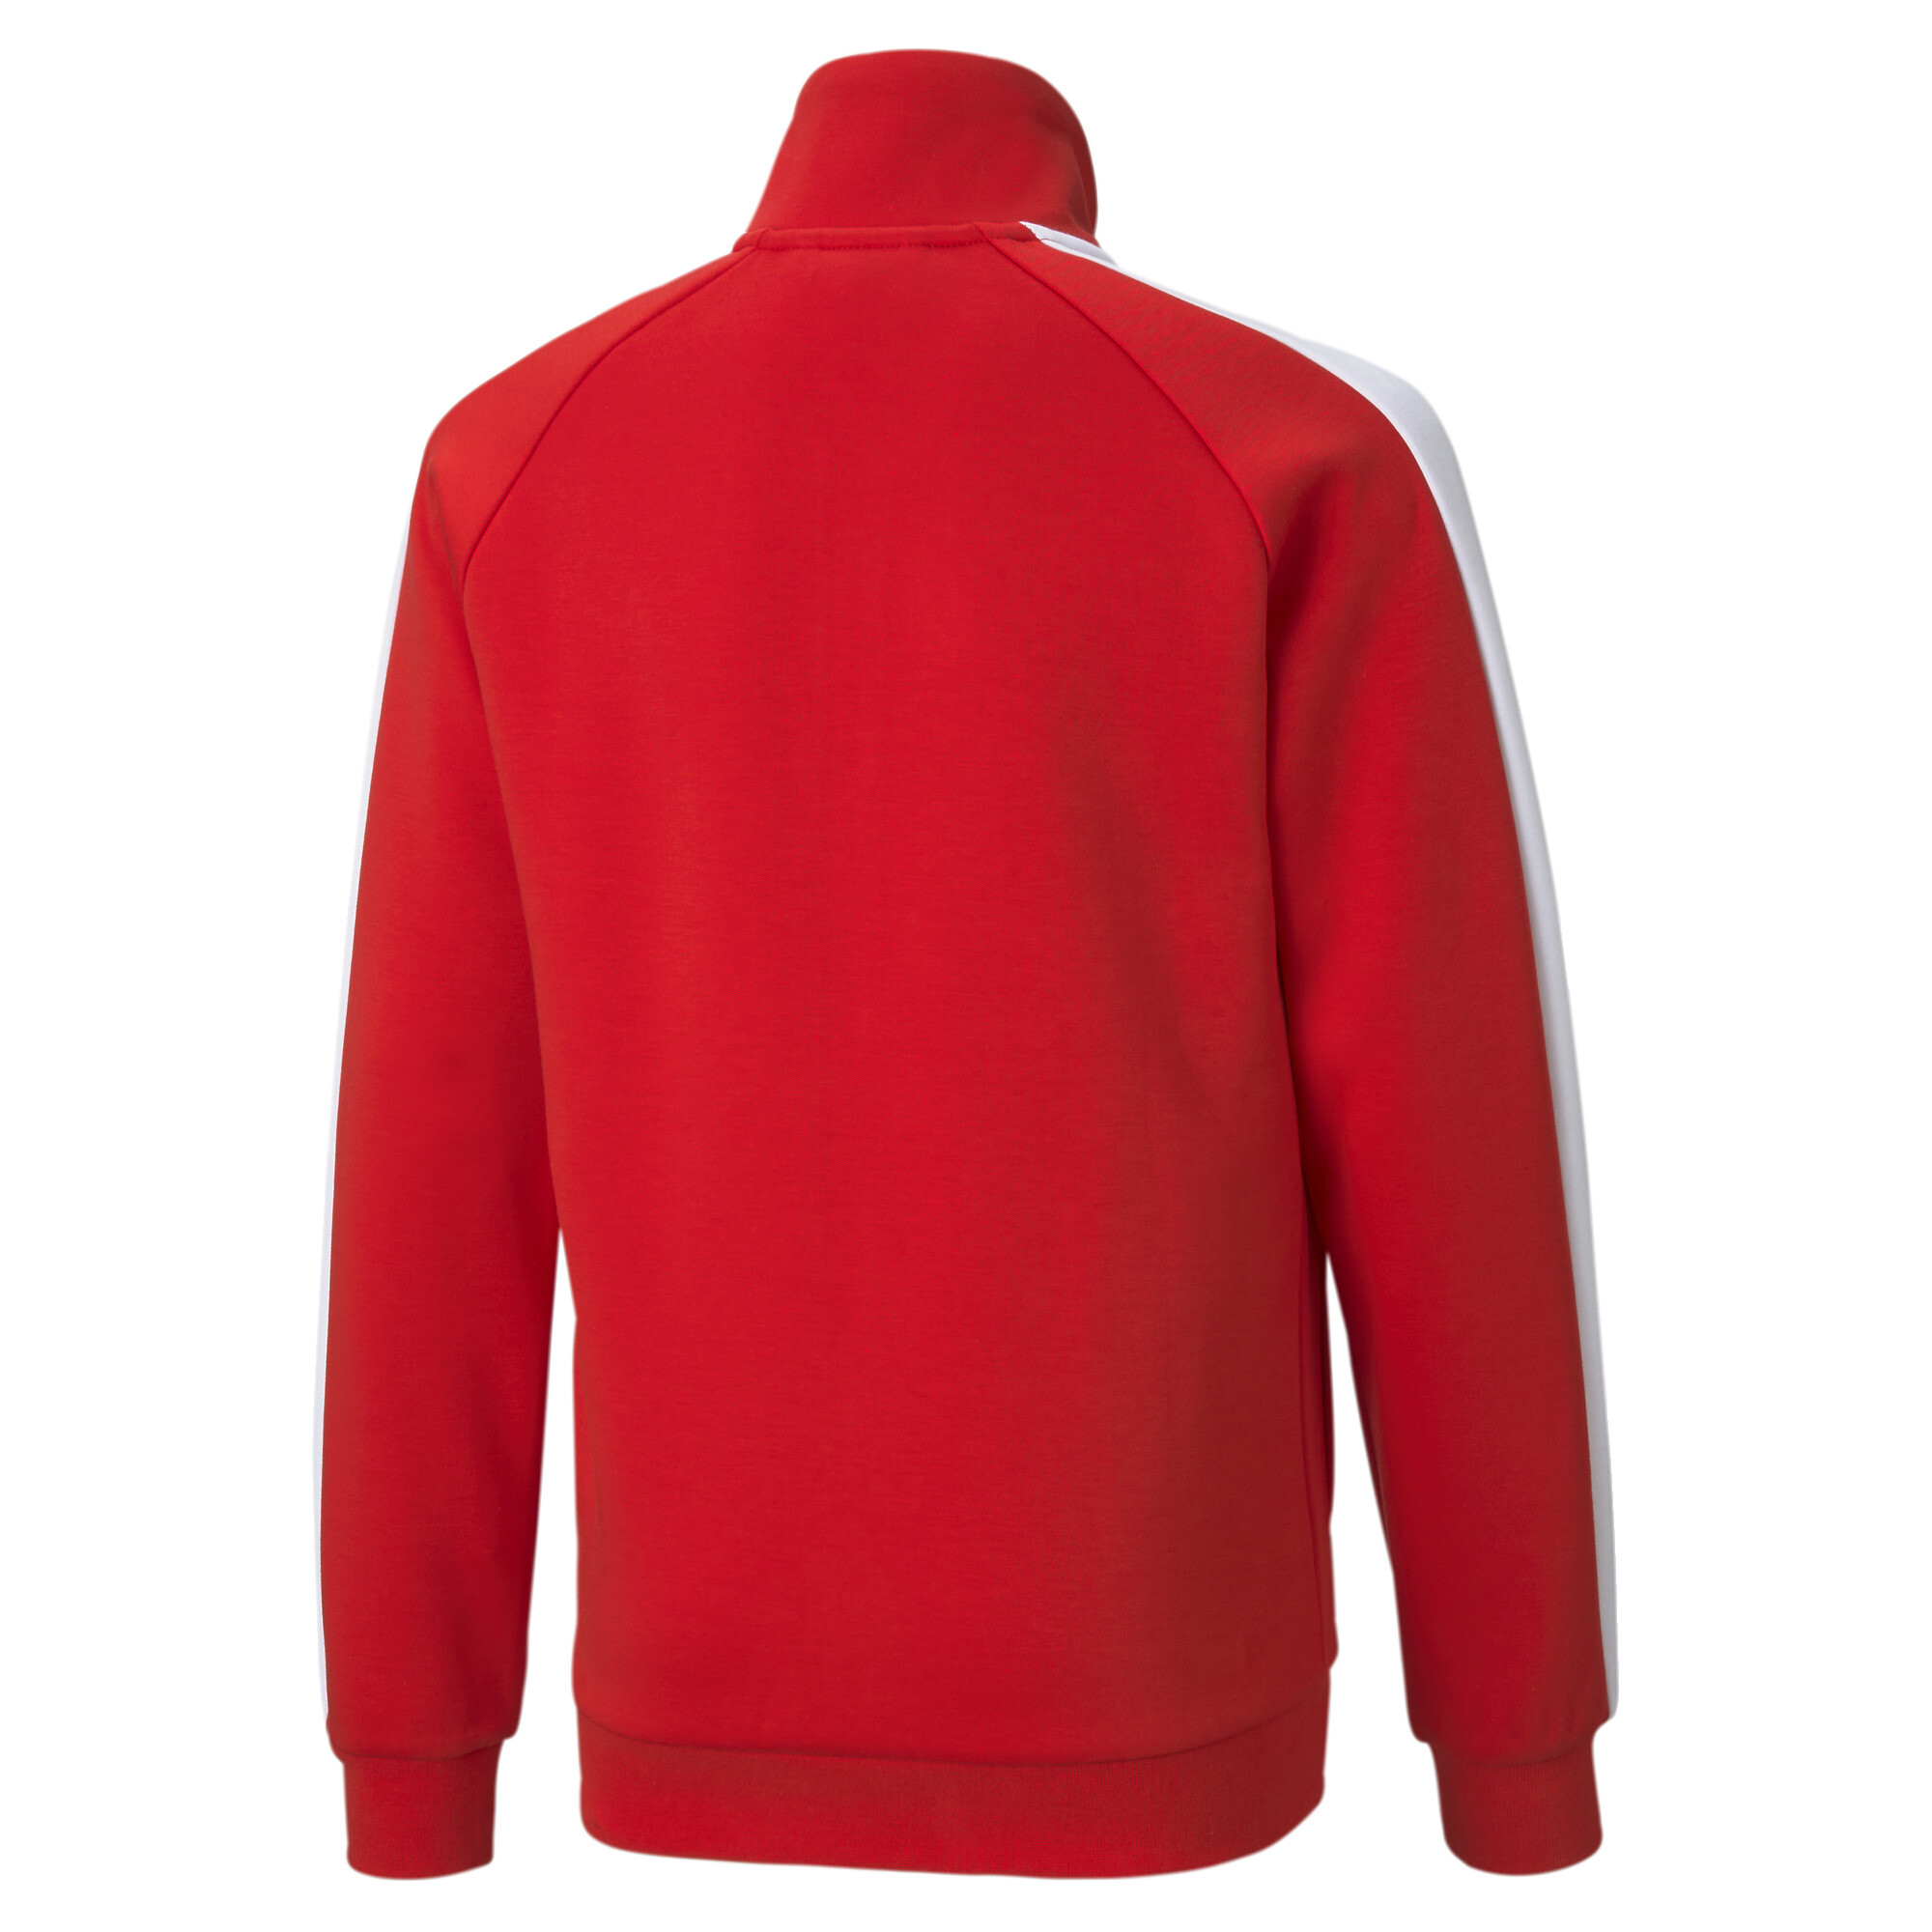 PUMA Iconic T7 Track Jacket In Red, Size 9-10 Youth